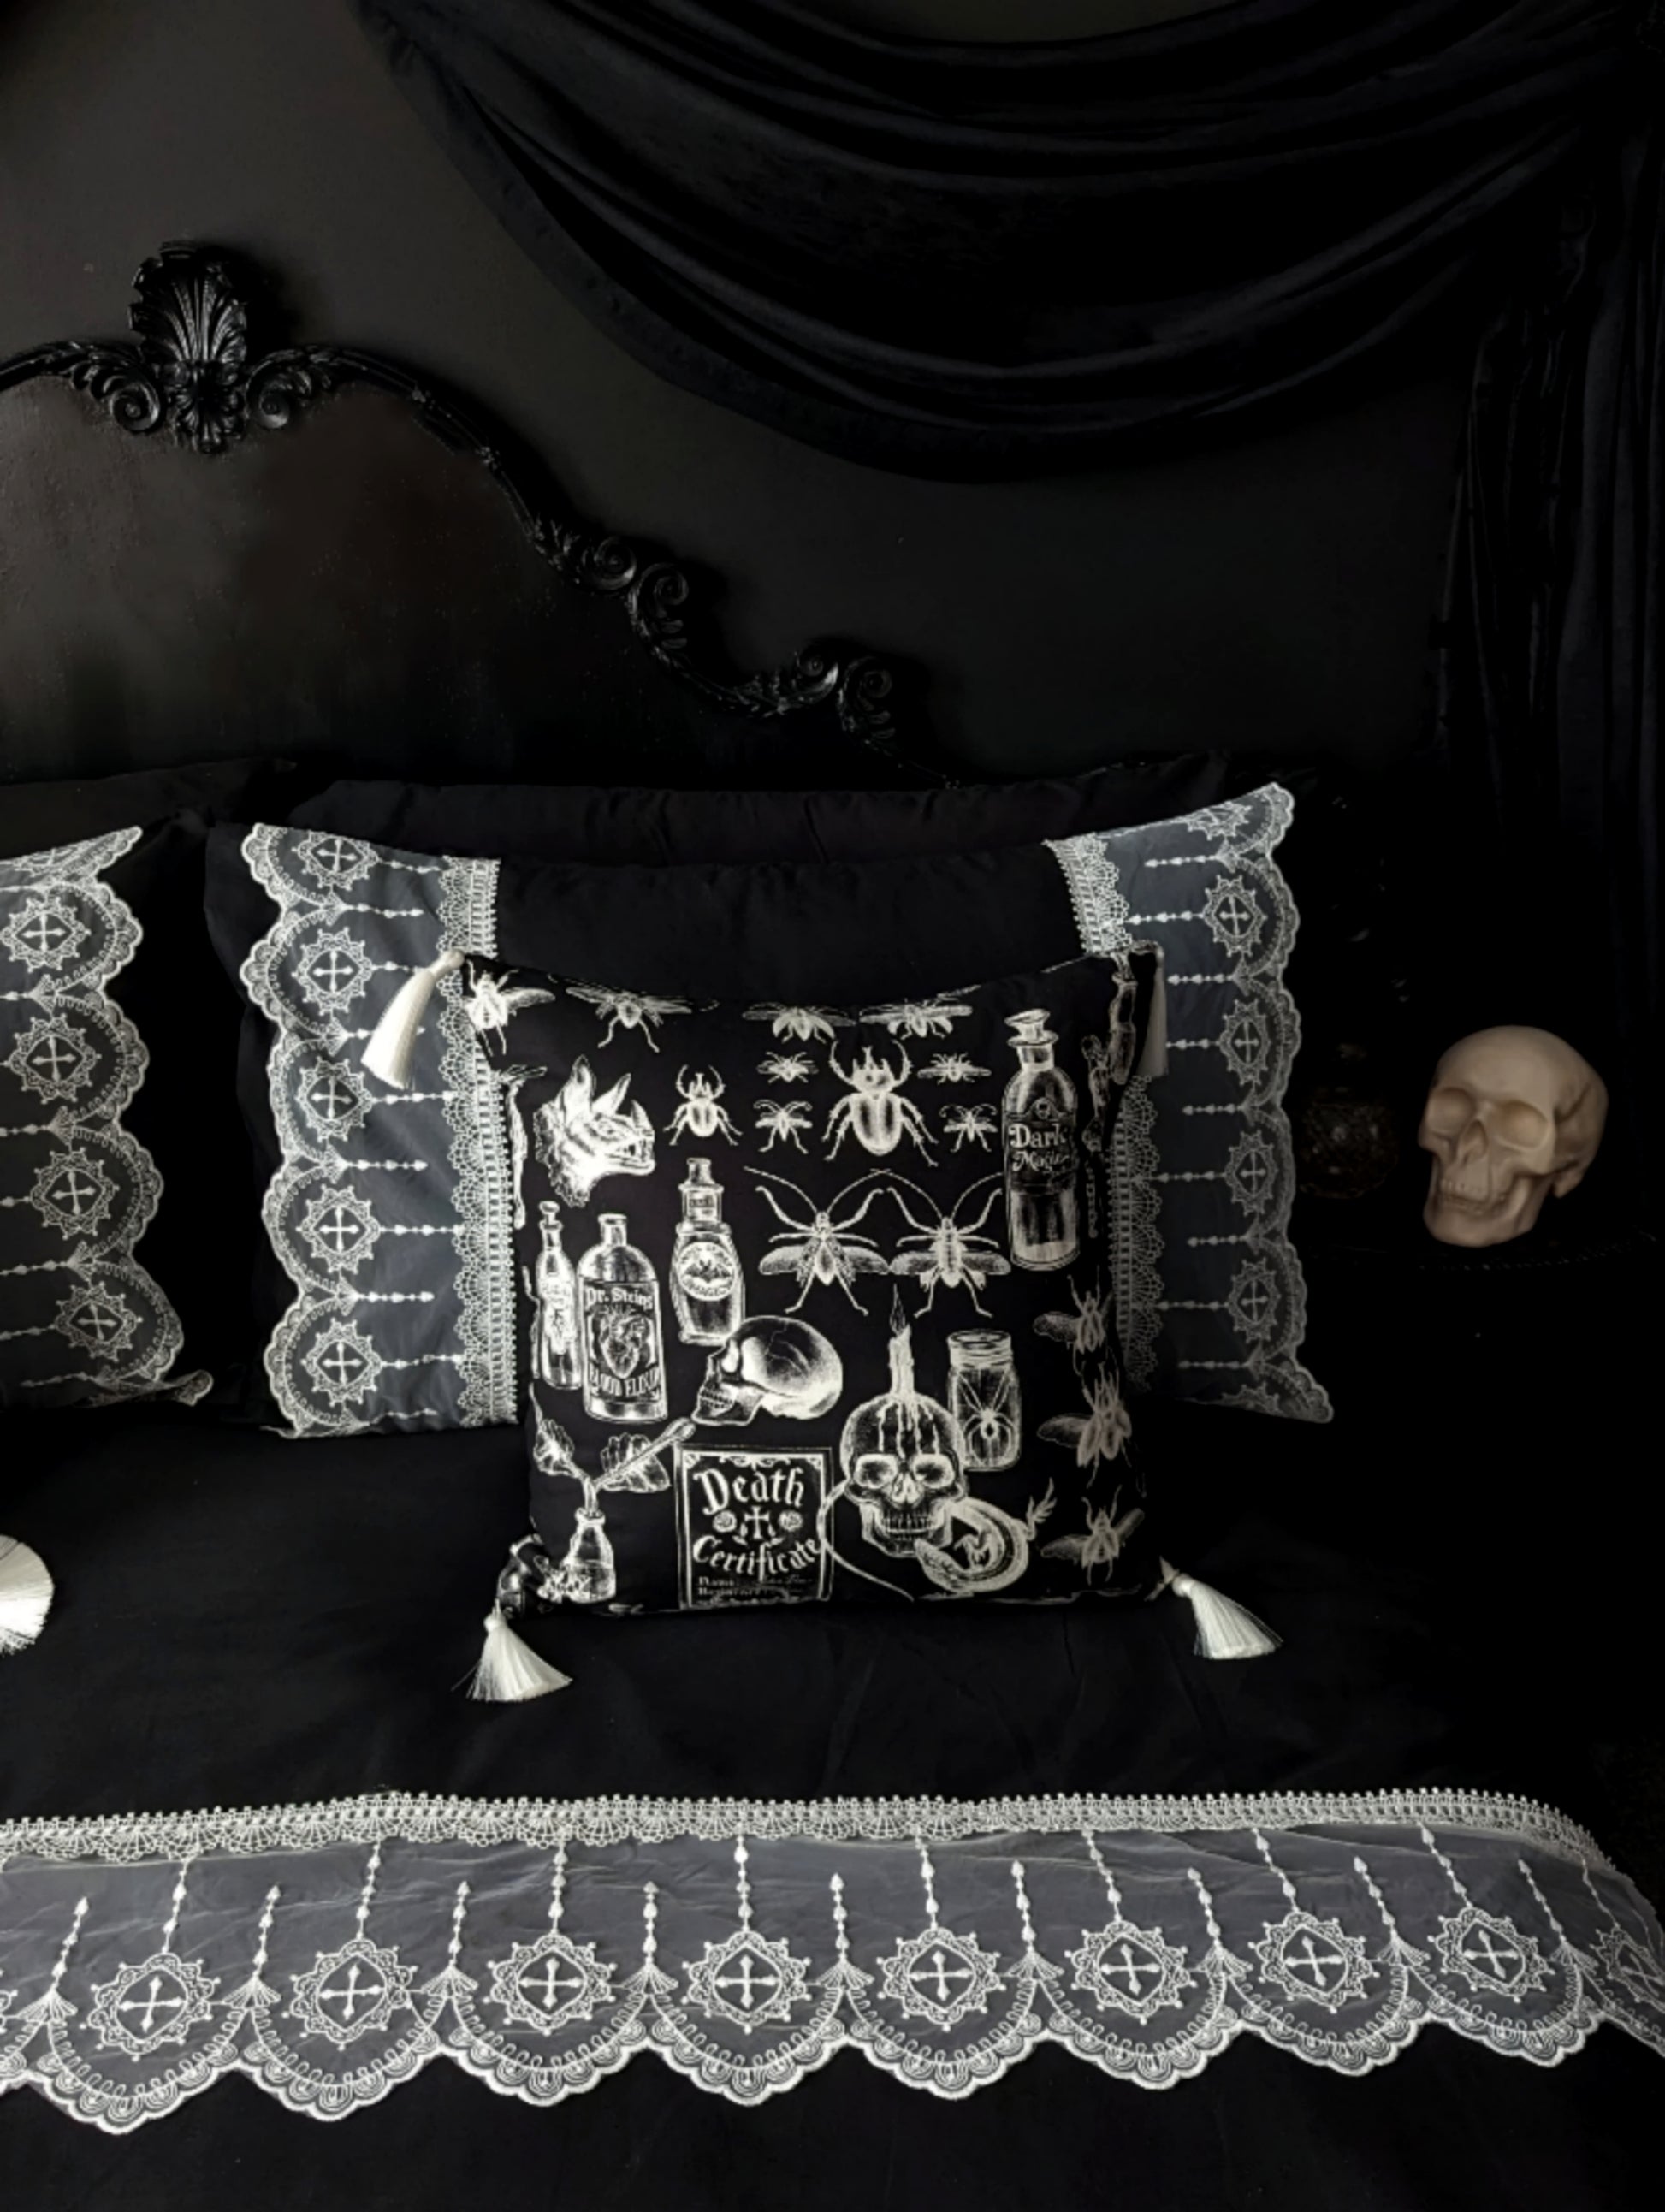 Mourning Parlour black lace bedding from Joely Ball Home. Wide bands of white scalloped lace adorn a  black pillowcase and duvet cover on a black Rococco bed. The wall is black with black drapery and a skull sits on the bedside. 